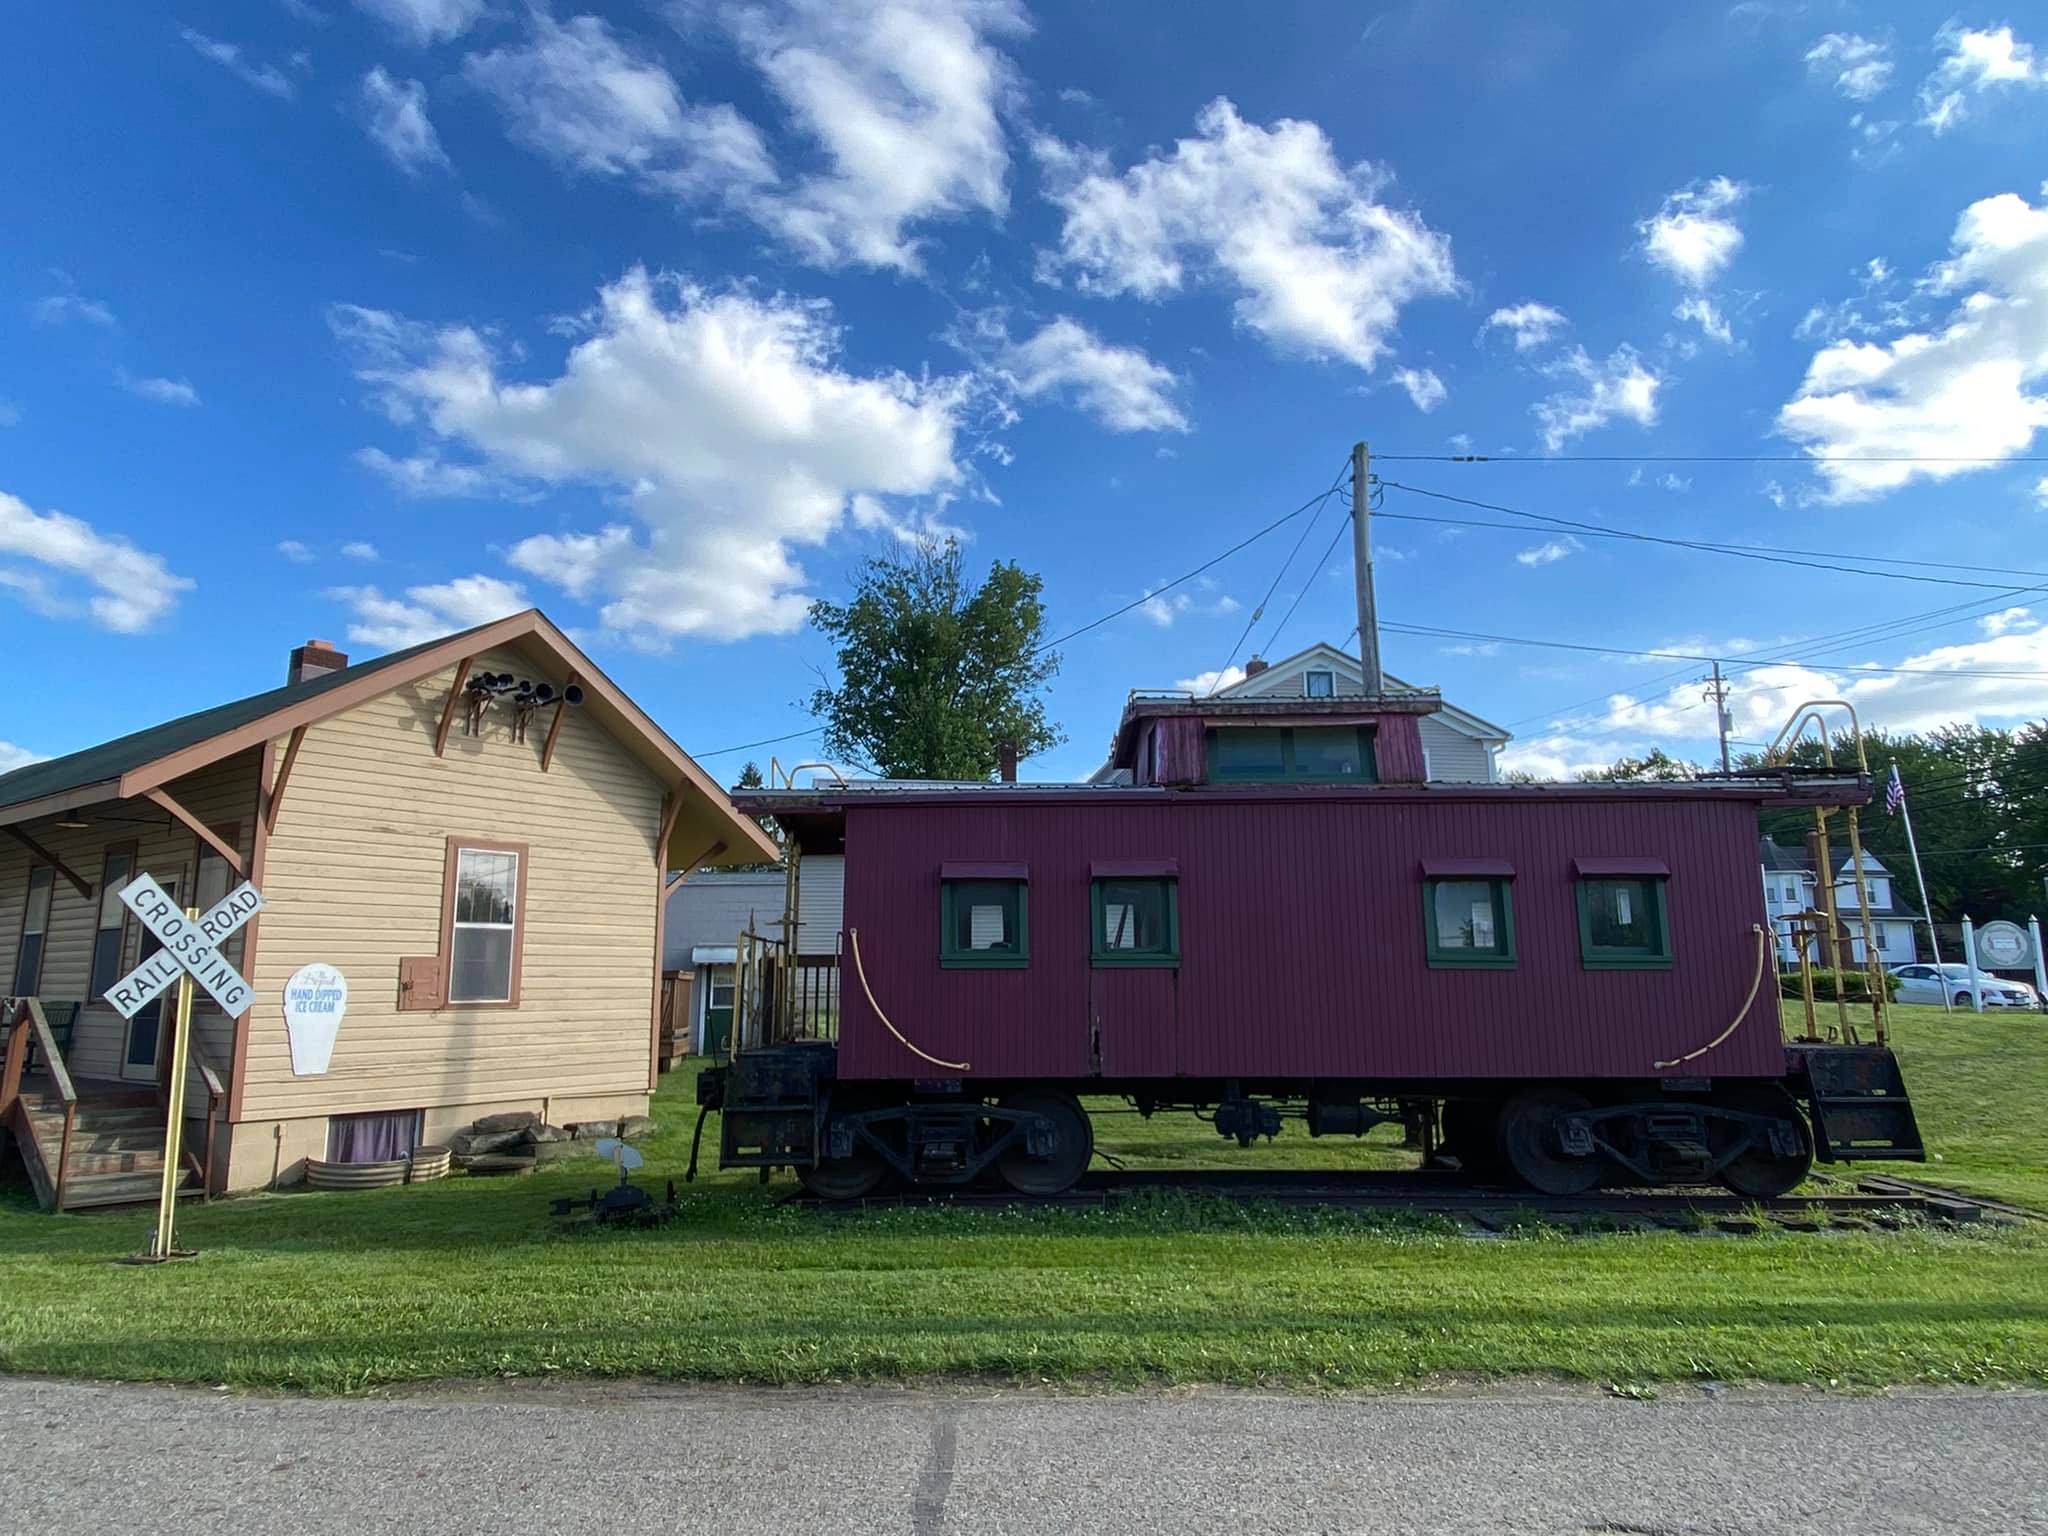 Old Caboose